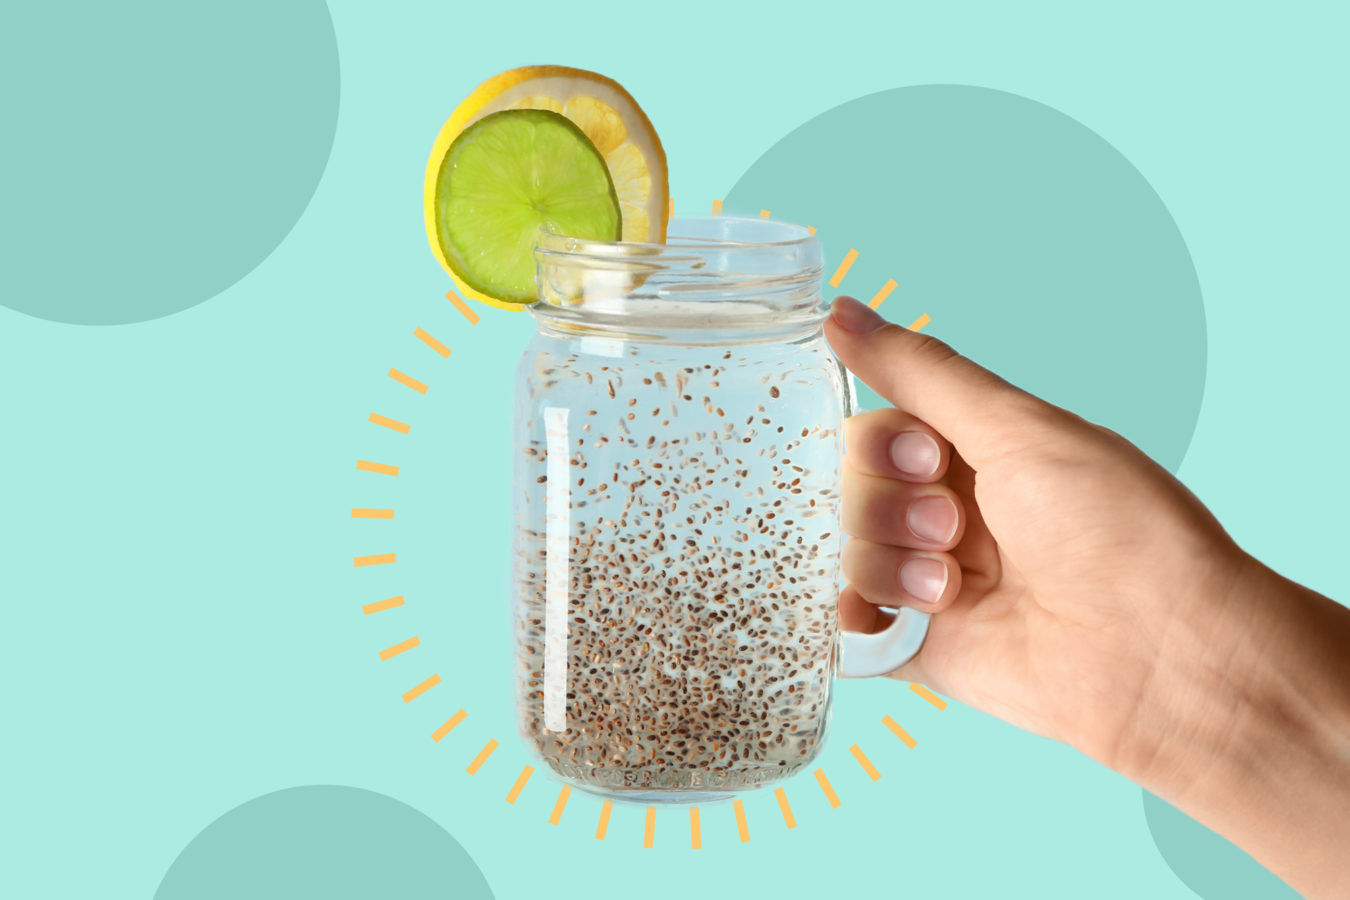 Chia Seeds in Water May Help With Weight Loss by Filling You up: Experts